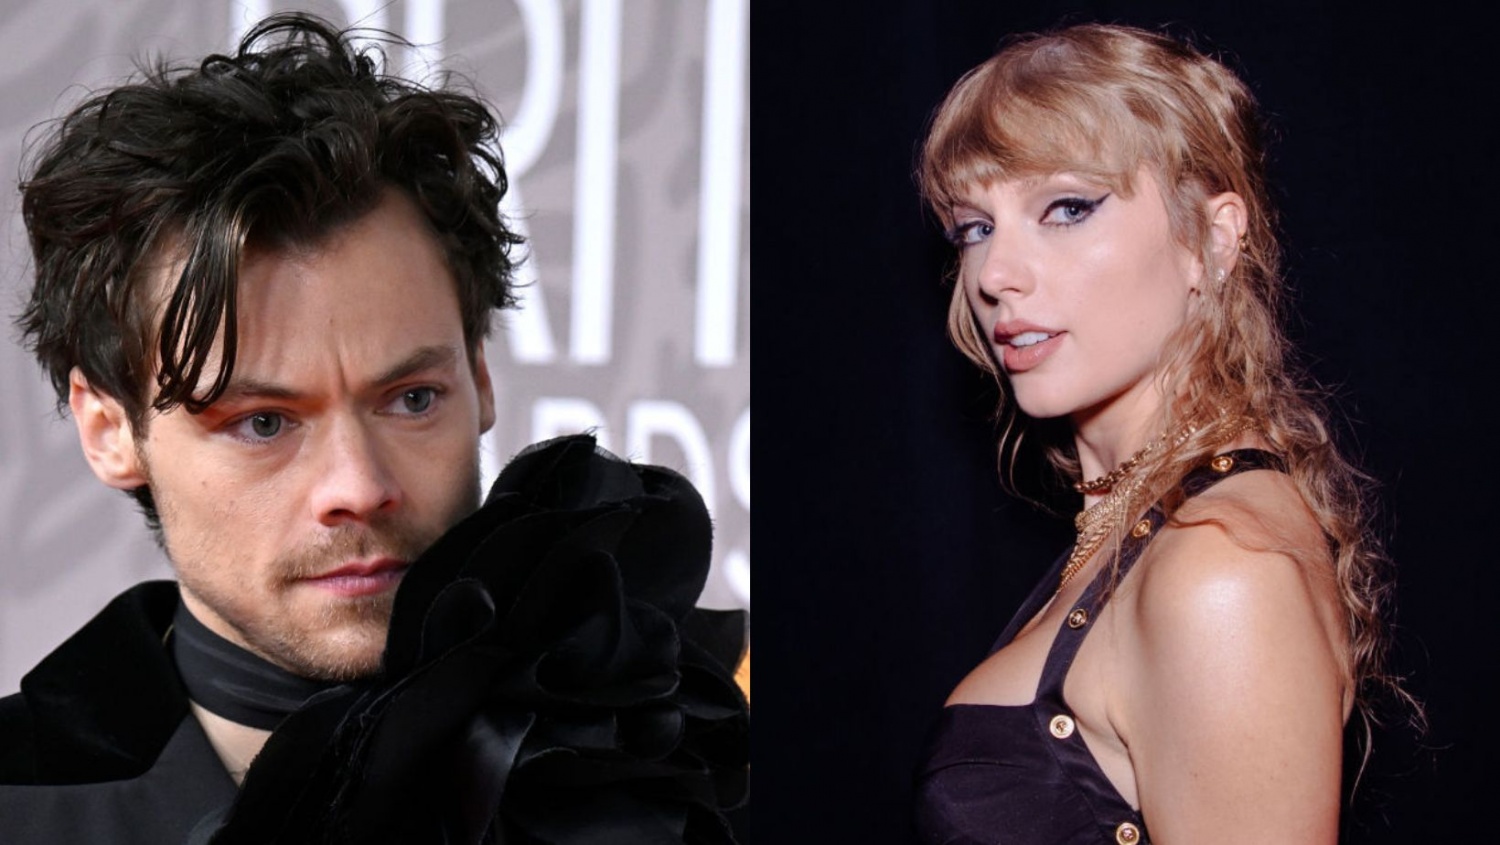 Harry Styles Shaves Off Head Because Taylor Swift Shaded Him in New Song?